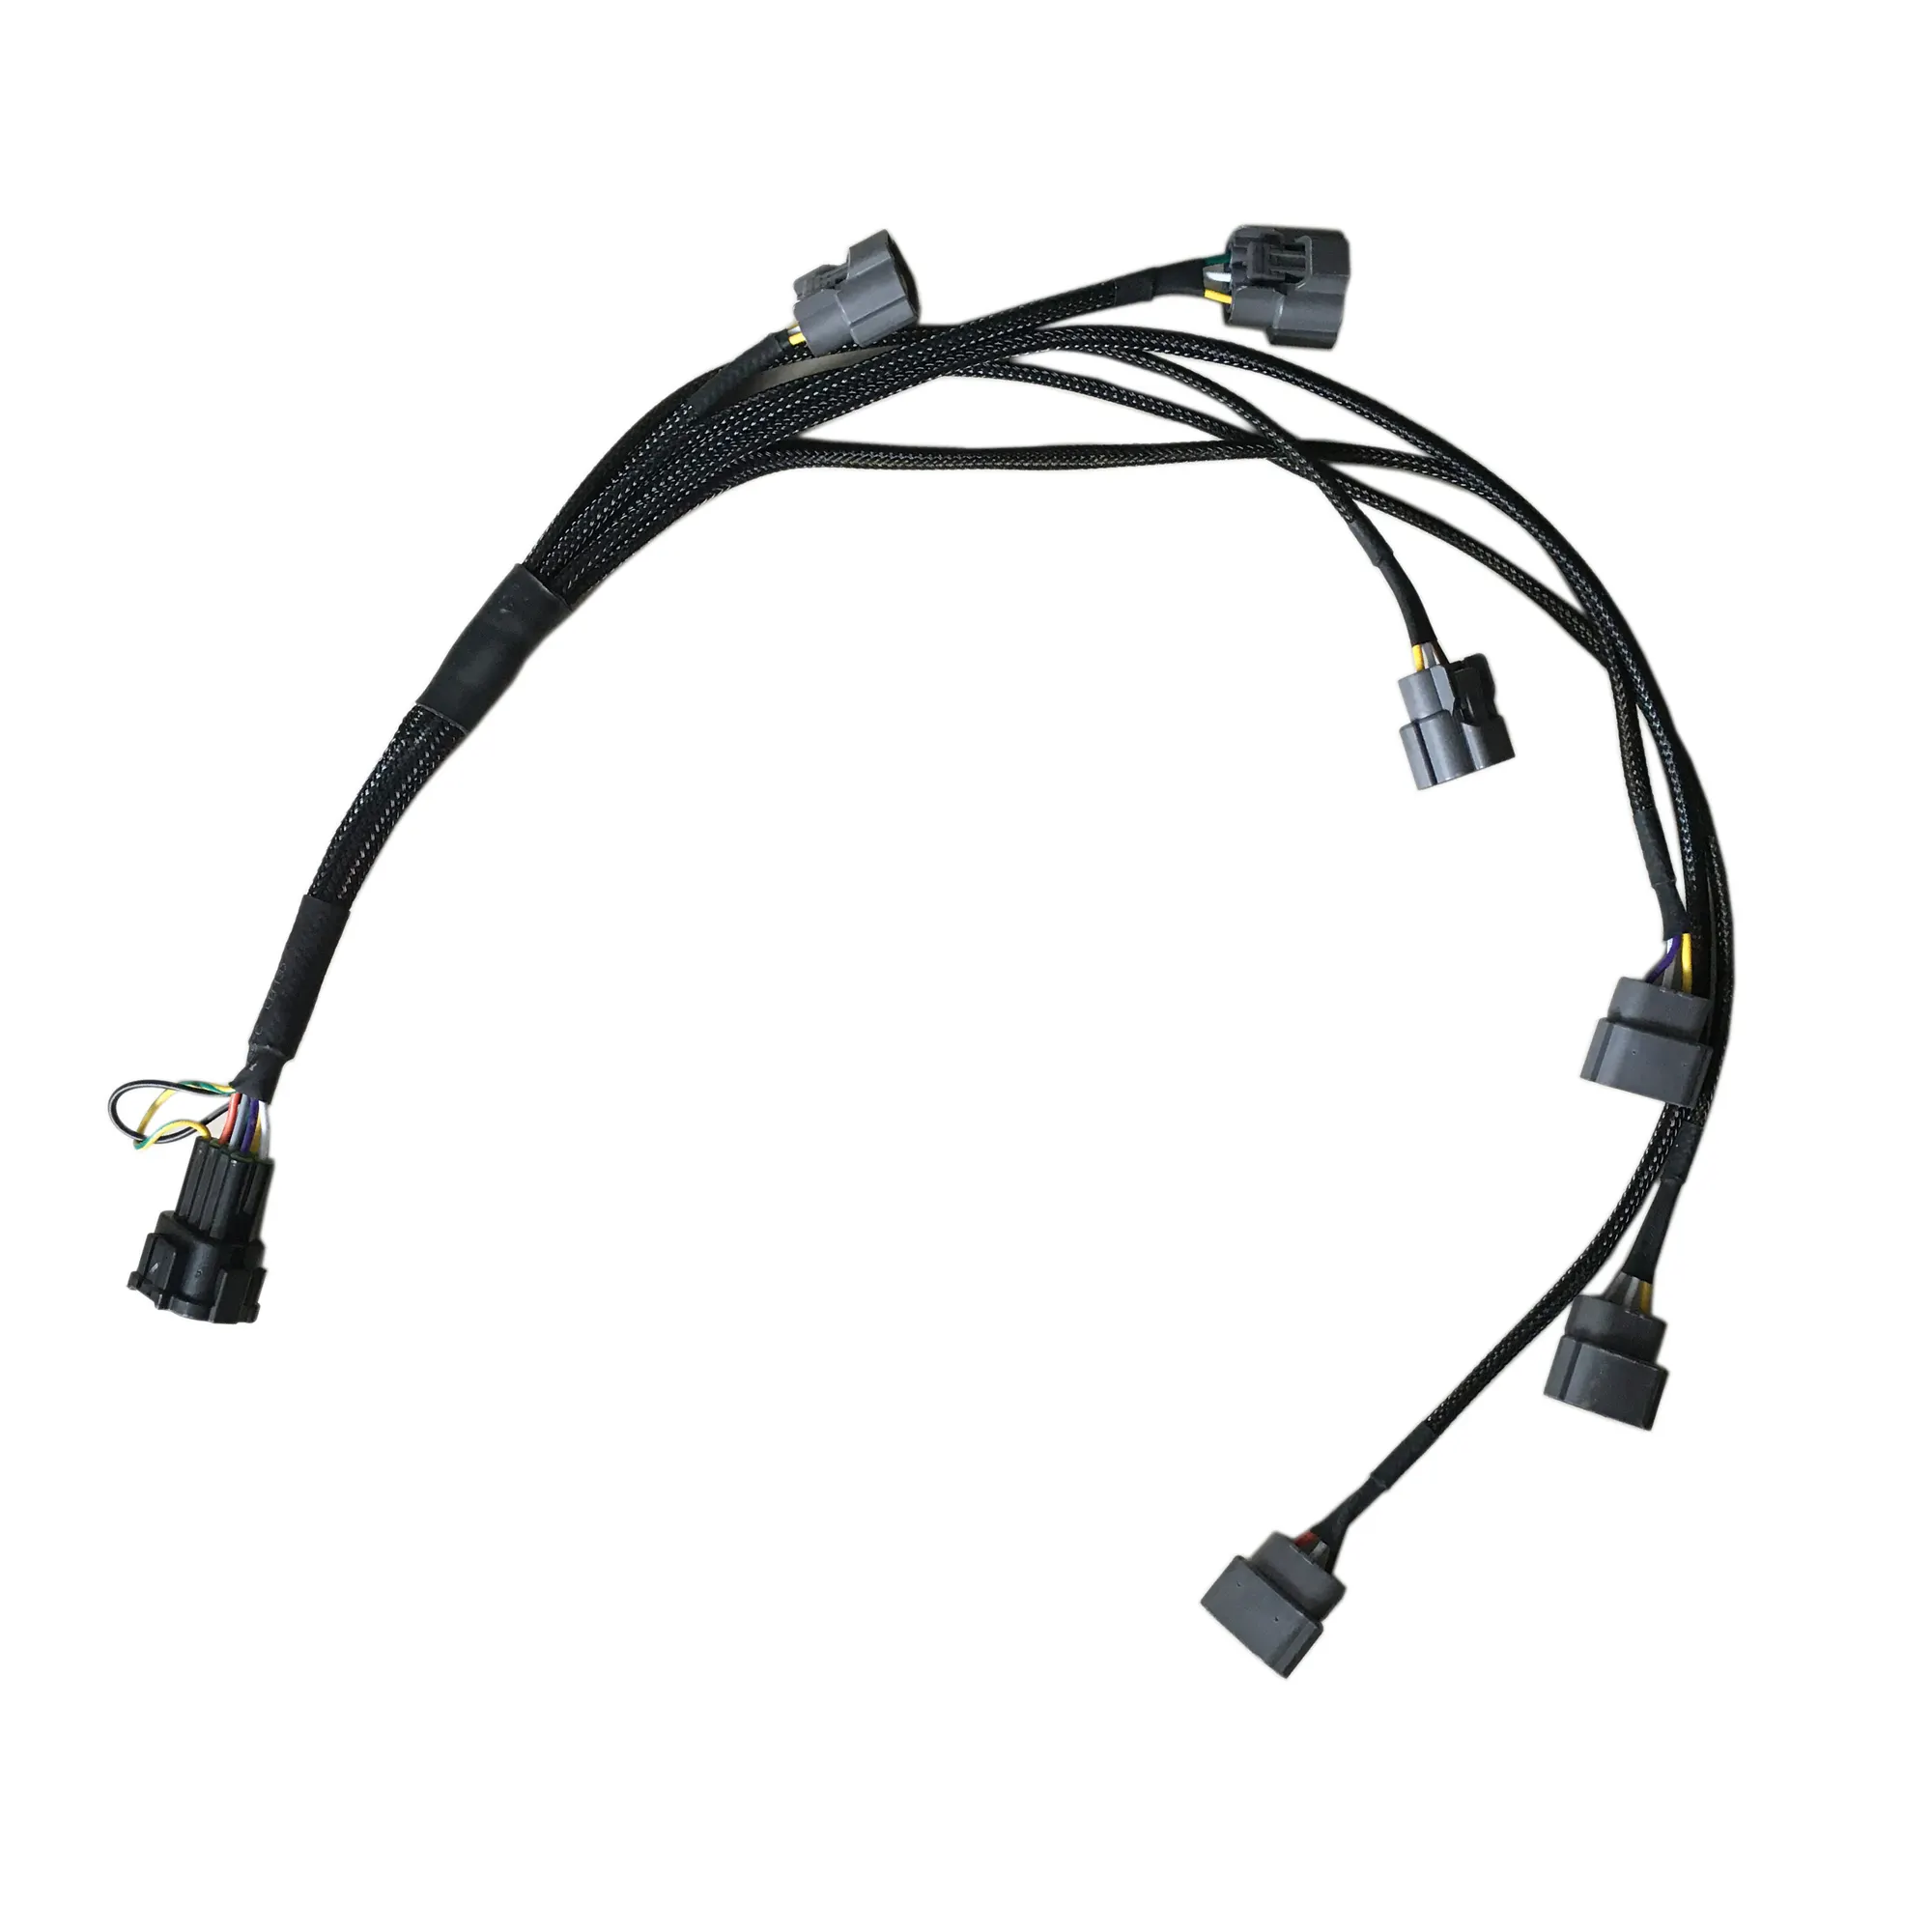 Auto Wire Harness cable assembly Smart Pro Coil Pack Sub Harness for RB26 RB26DETT R34 BNR34